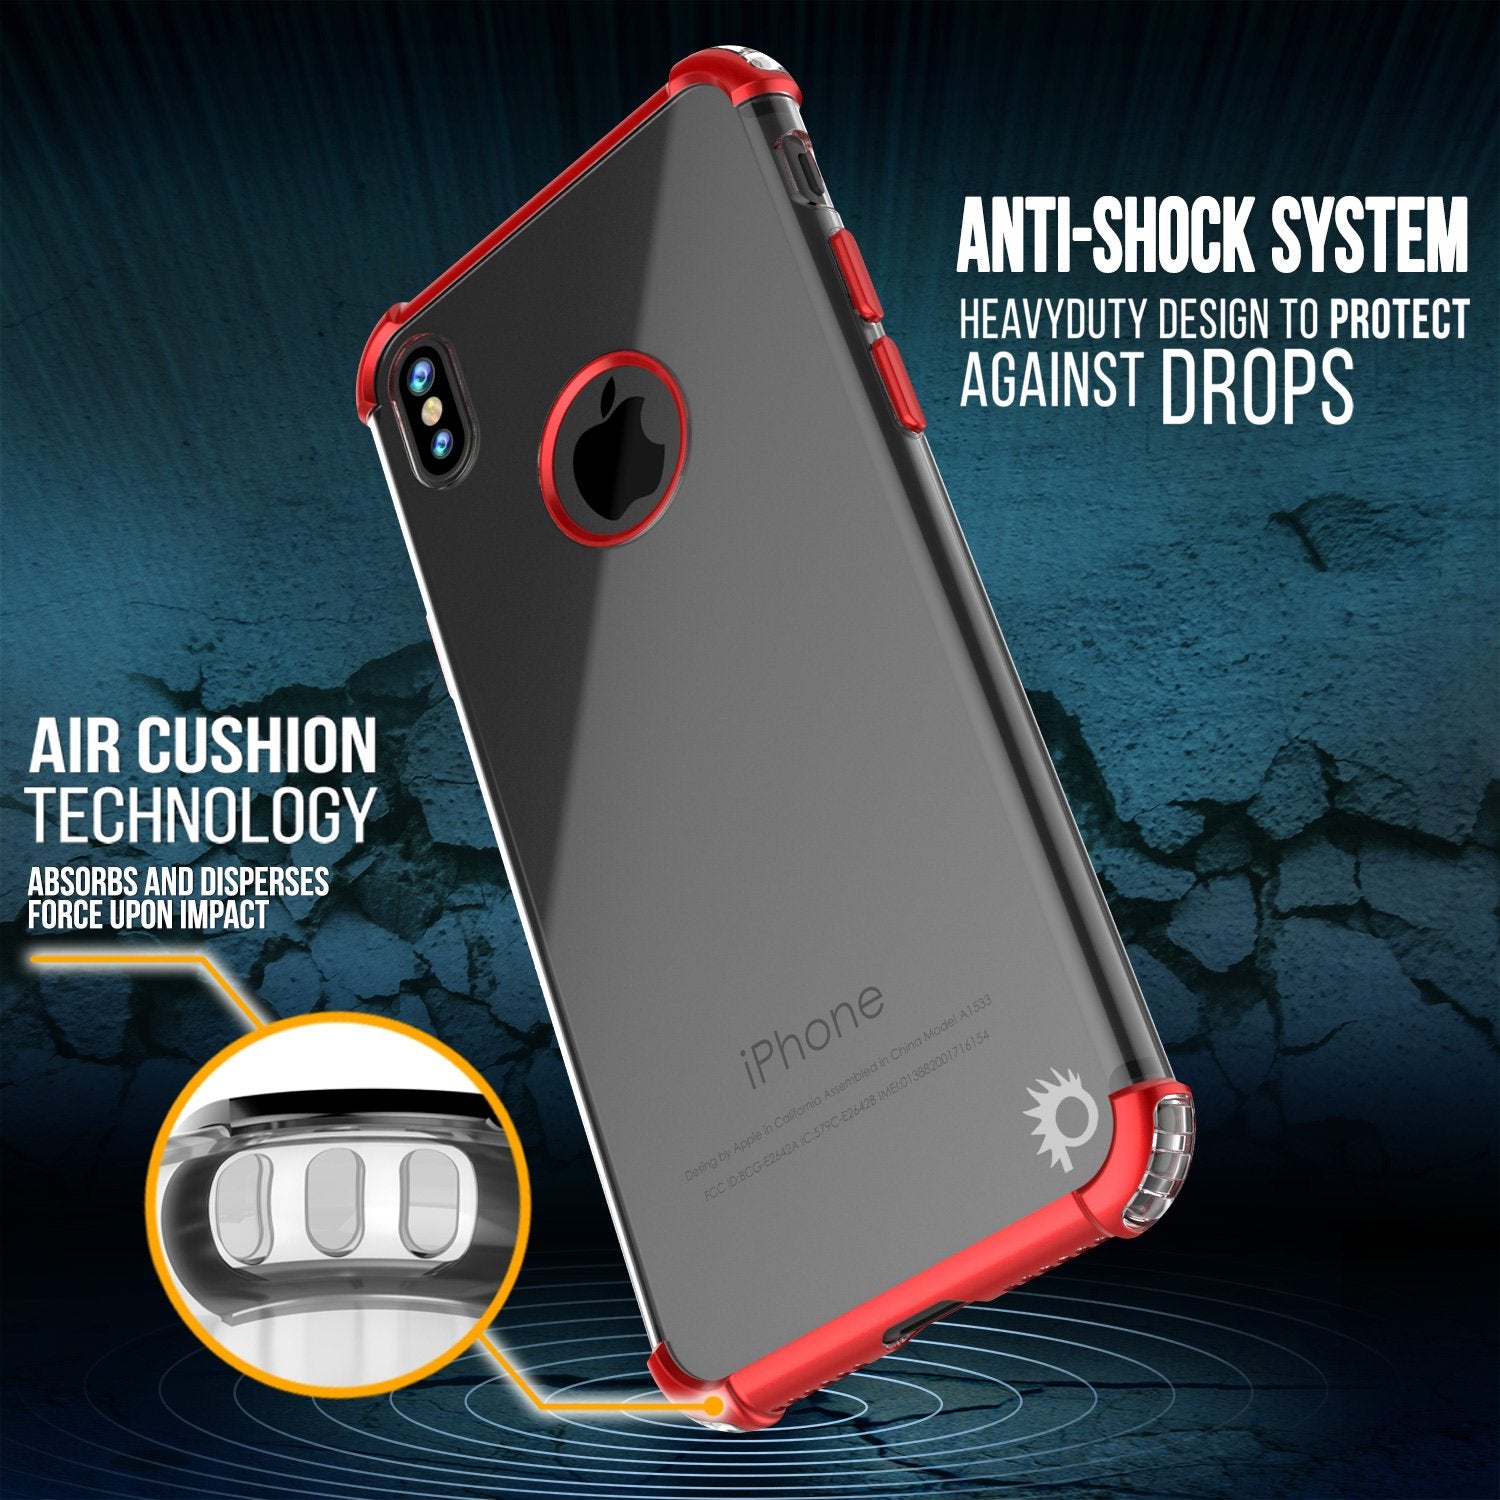 iPhone X Case, Punkcase BLAZE Red Series Protective Cover W/ PunkShield Screen Protector